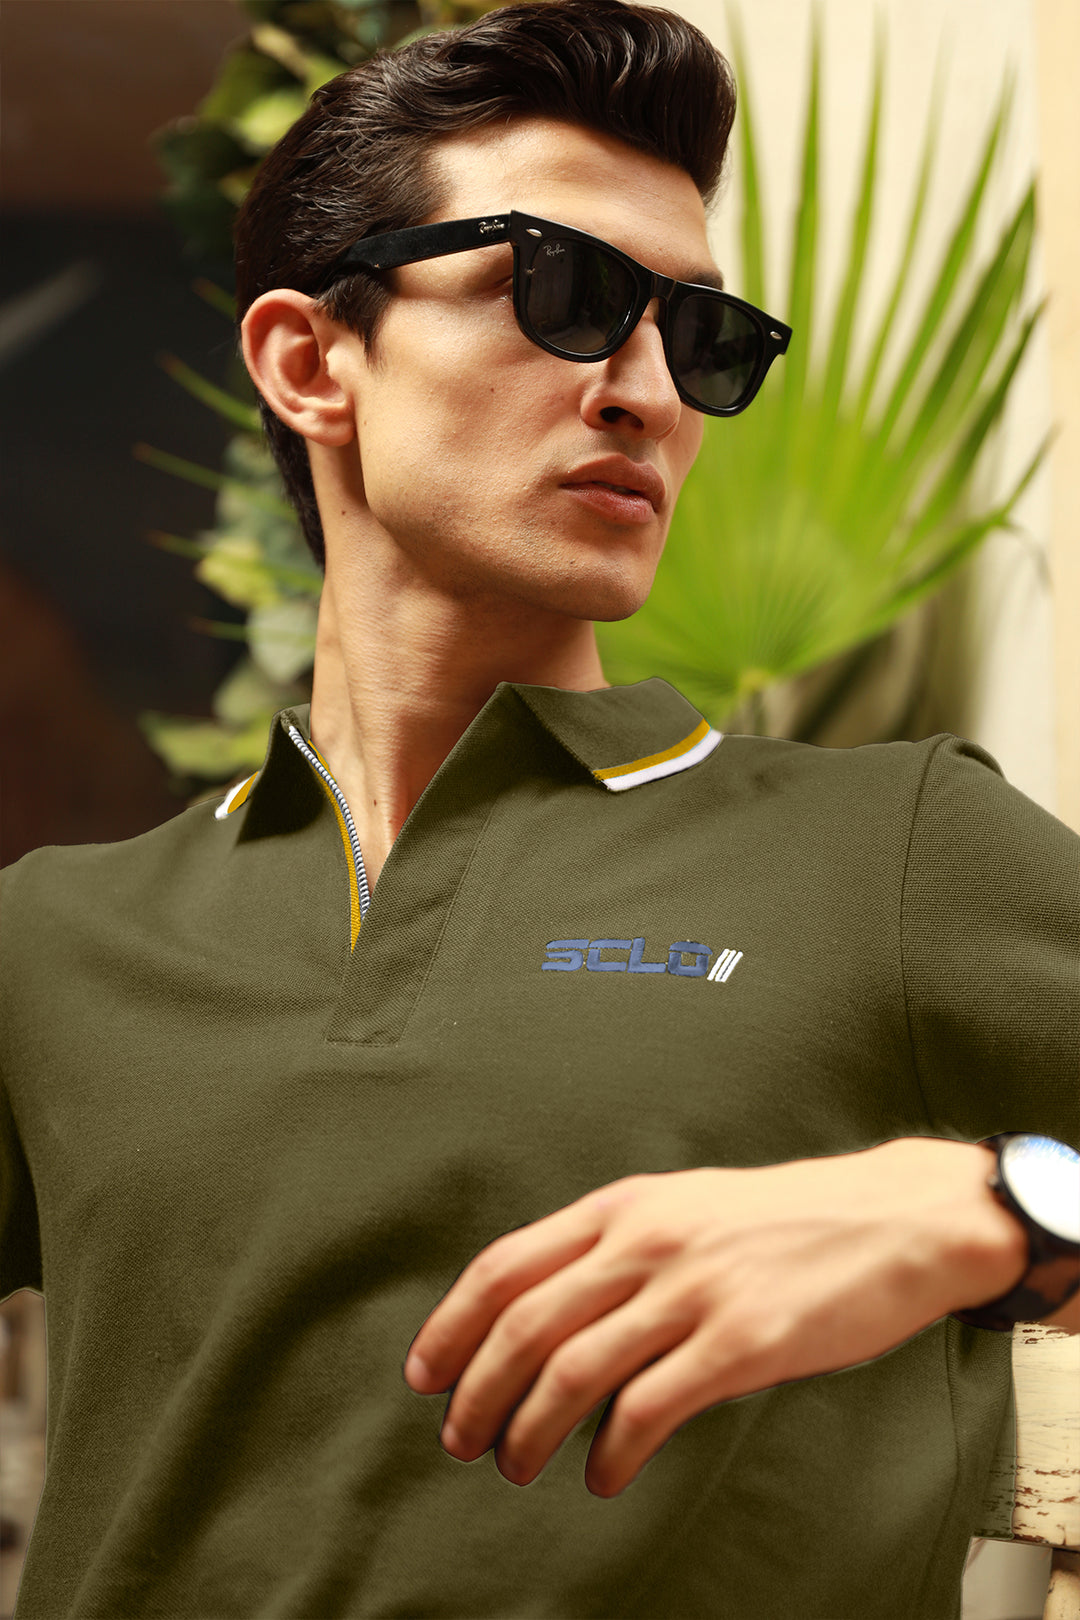 Olive Zip-Up Neckline Polo Shirt - S23 - MP0223R